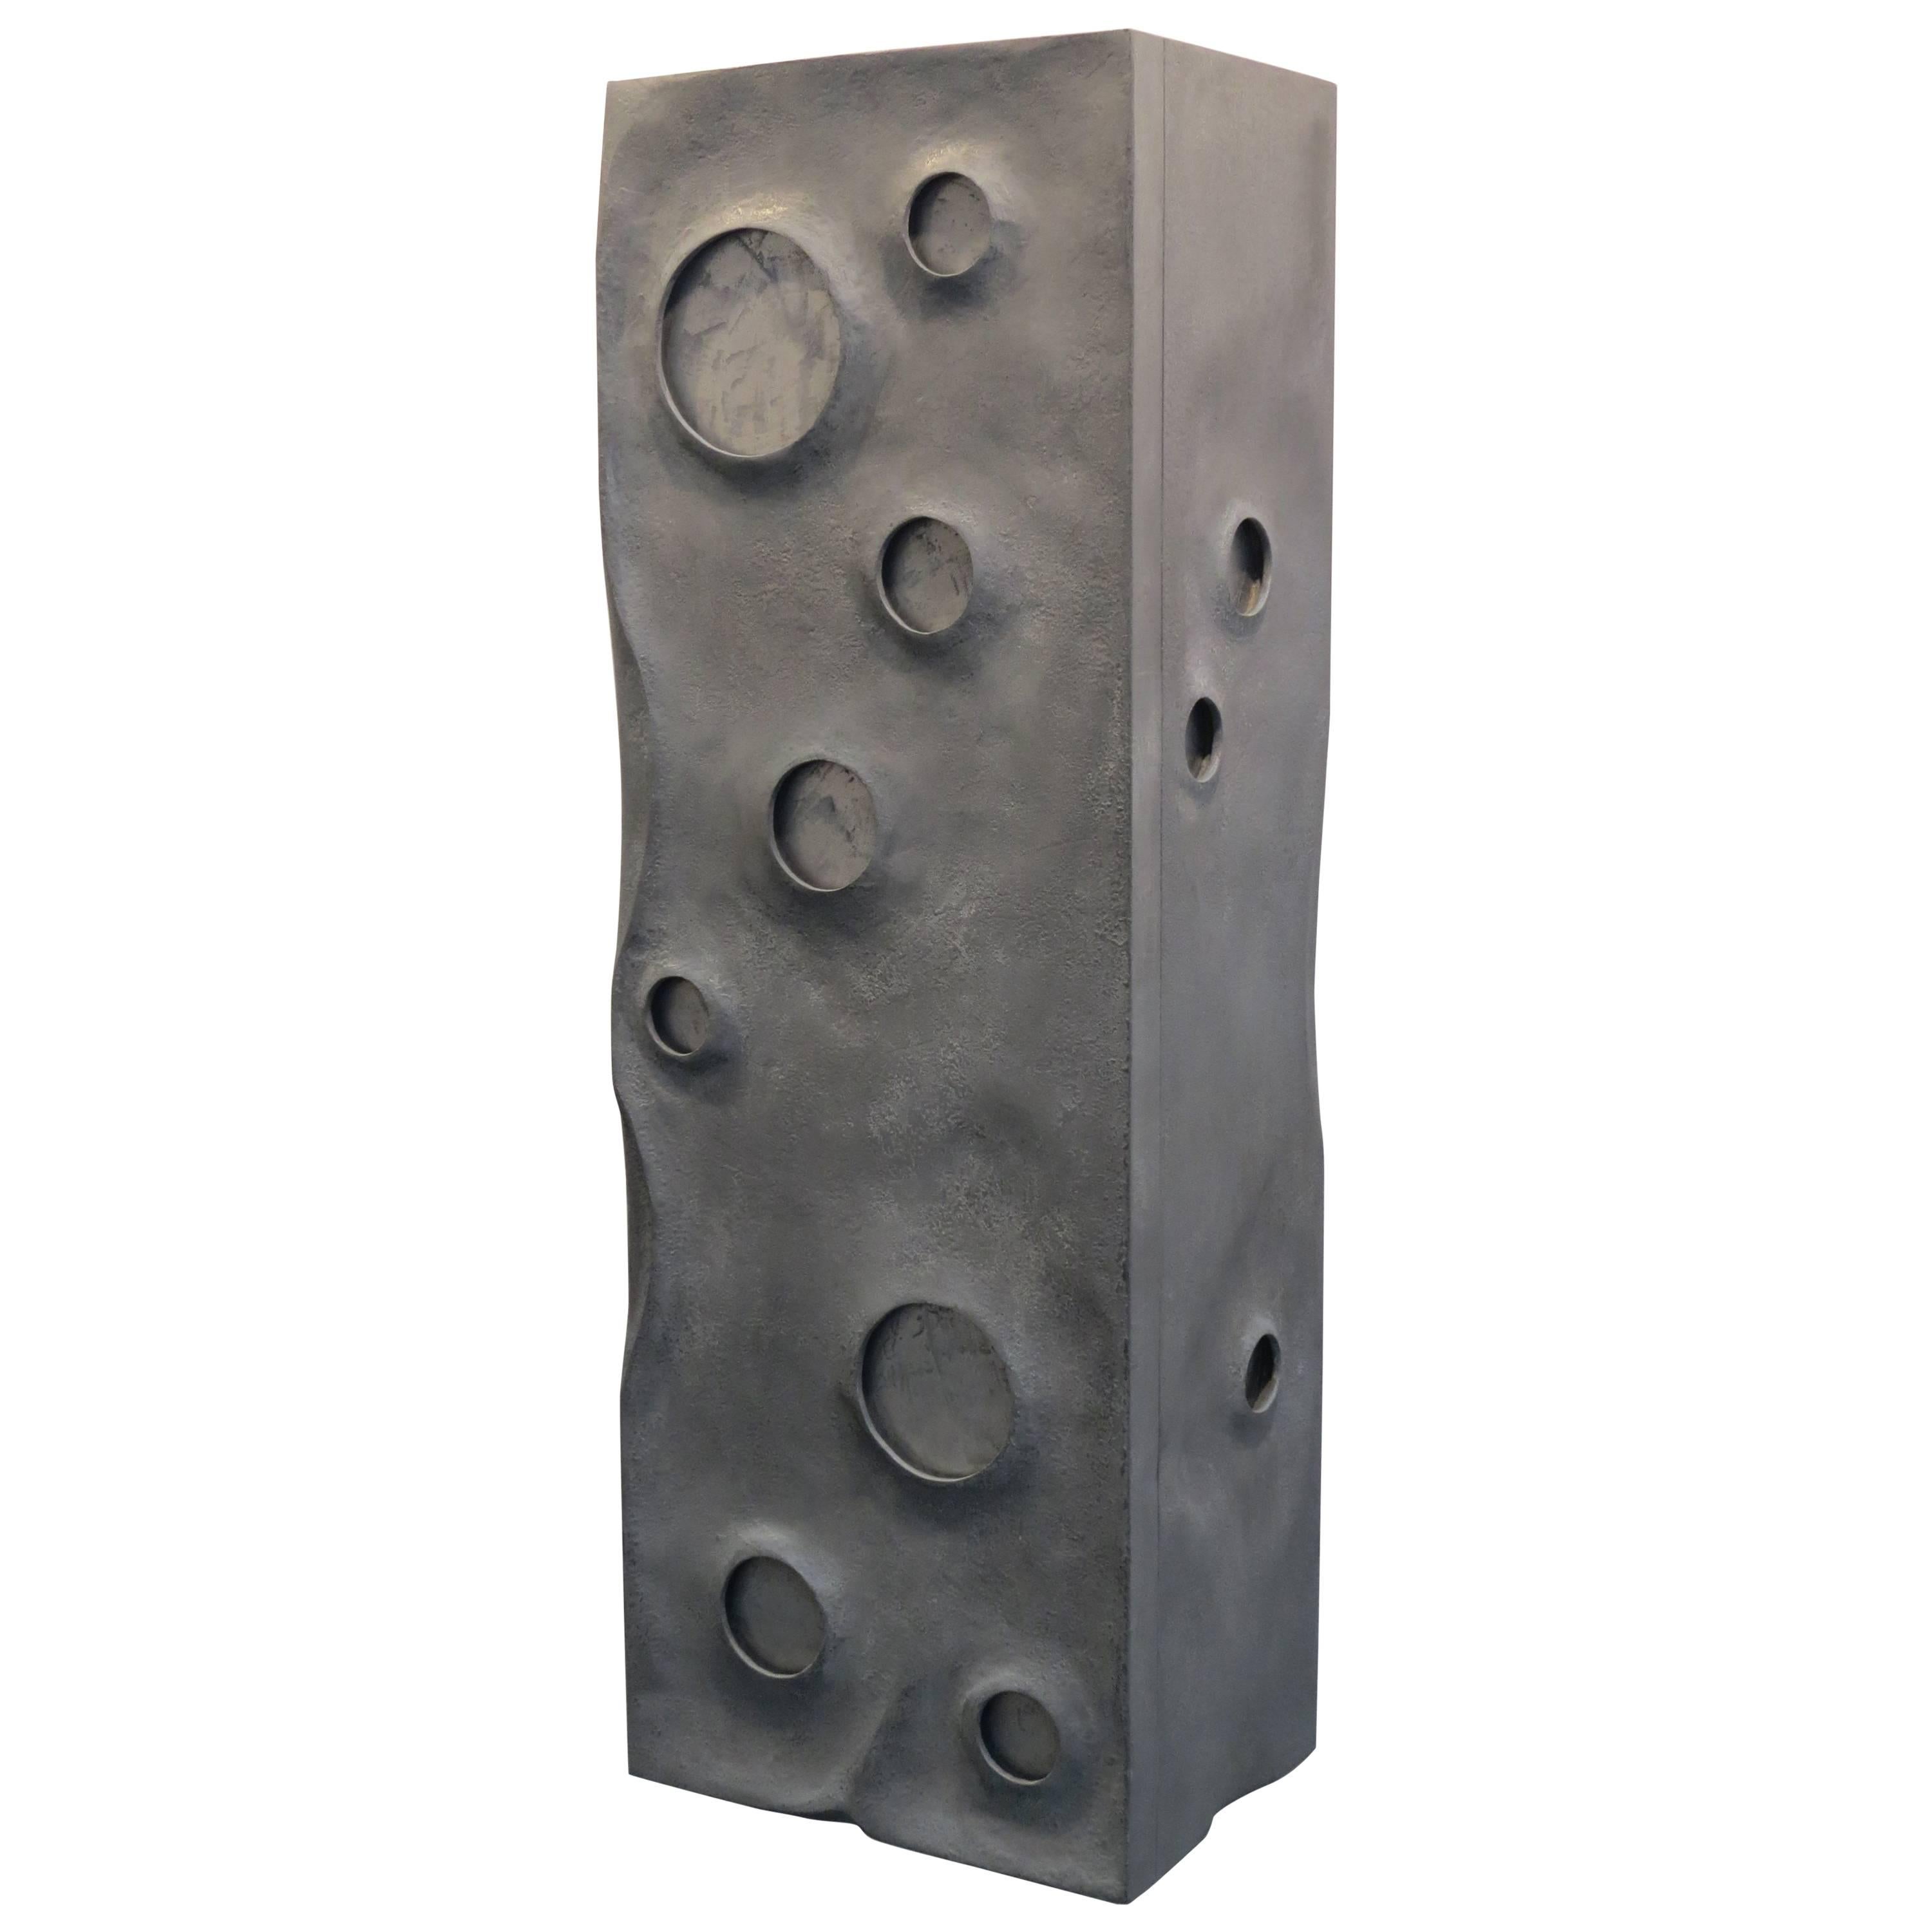 Art Furniture "Moonscape" Wall-Mounted Metal Coating Handmade For Sale